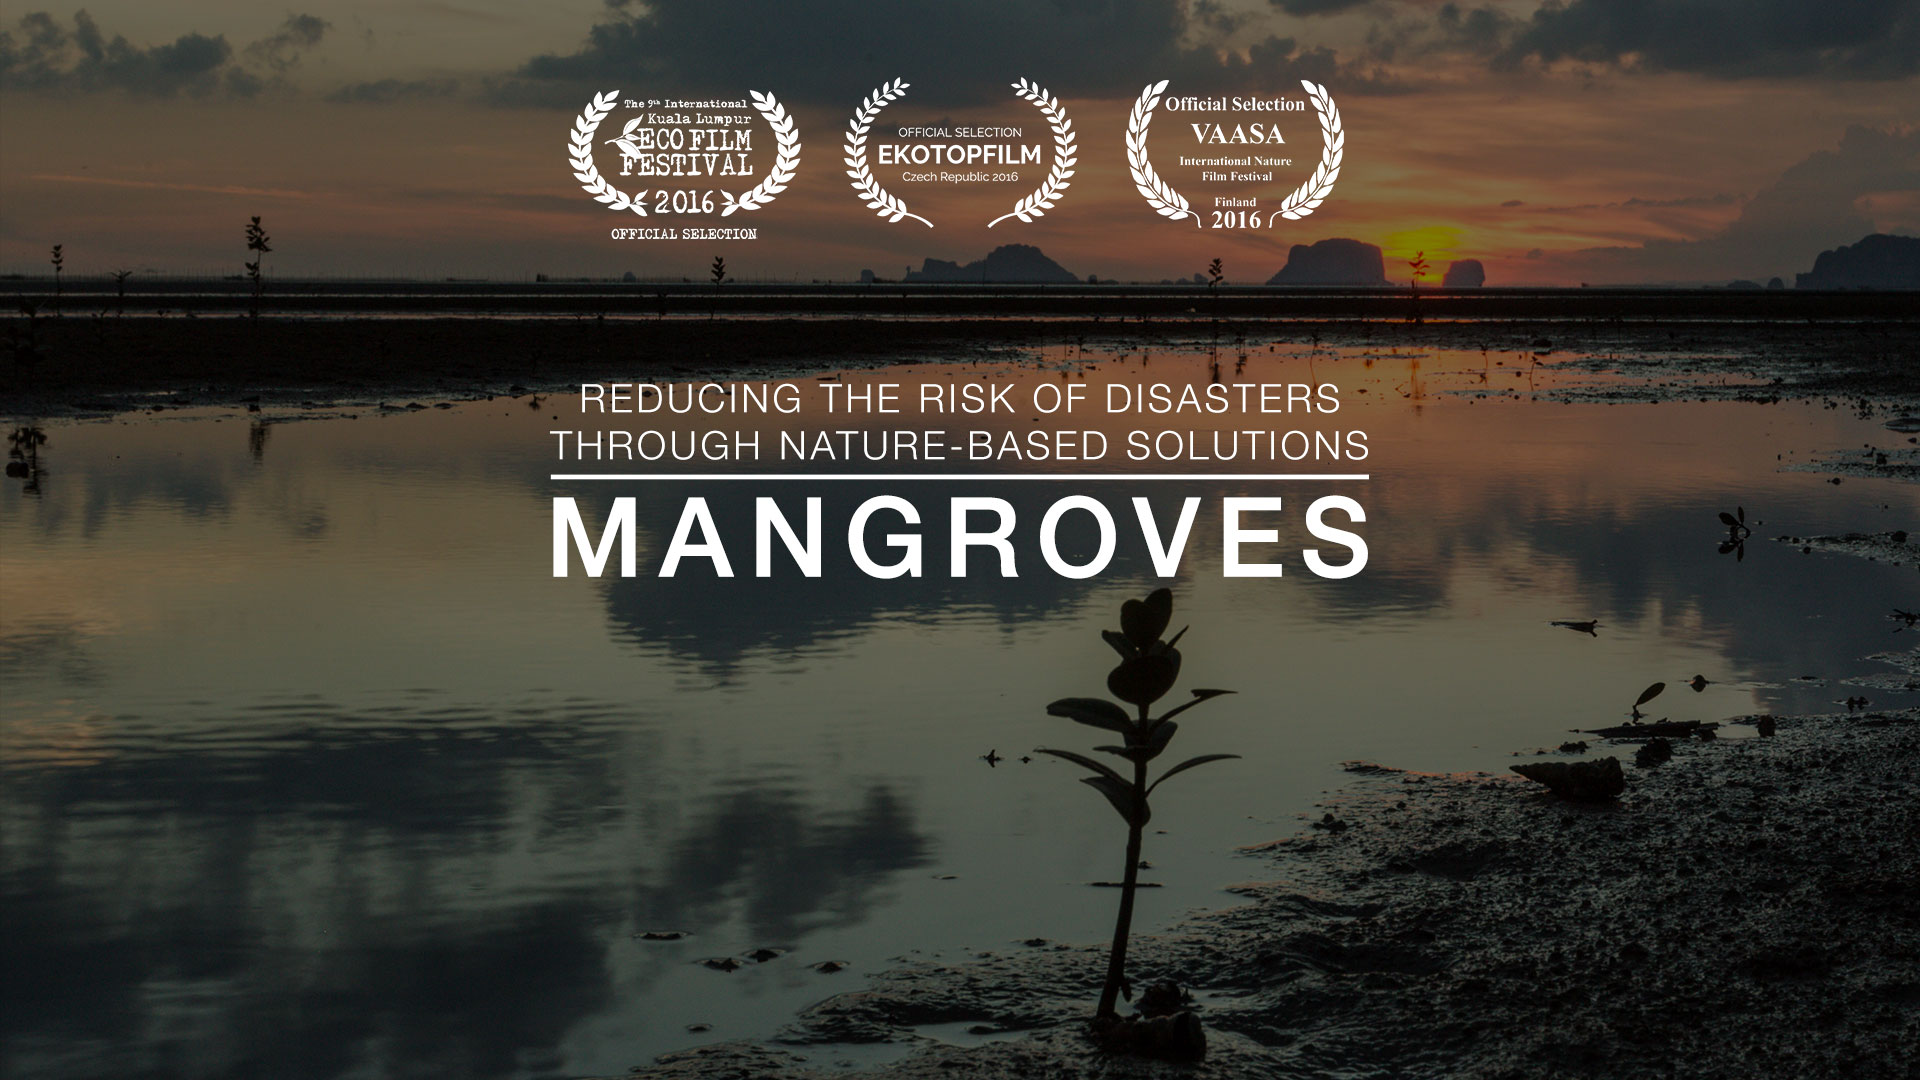 Mangroves: Reducing The Risk Of Disasters Through Nature-Based Solutions